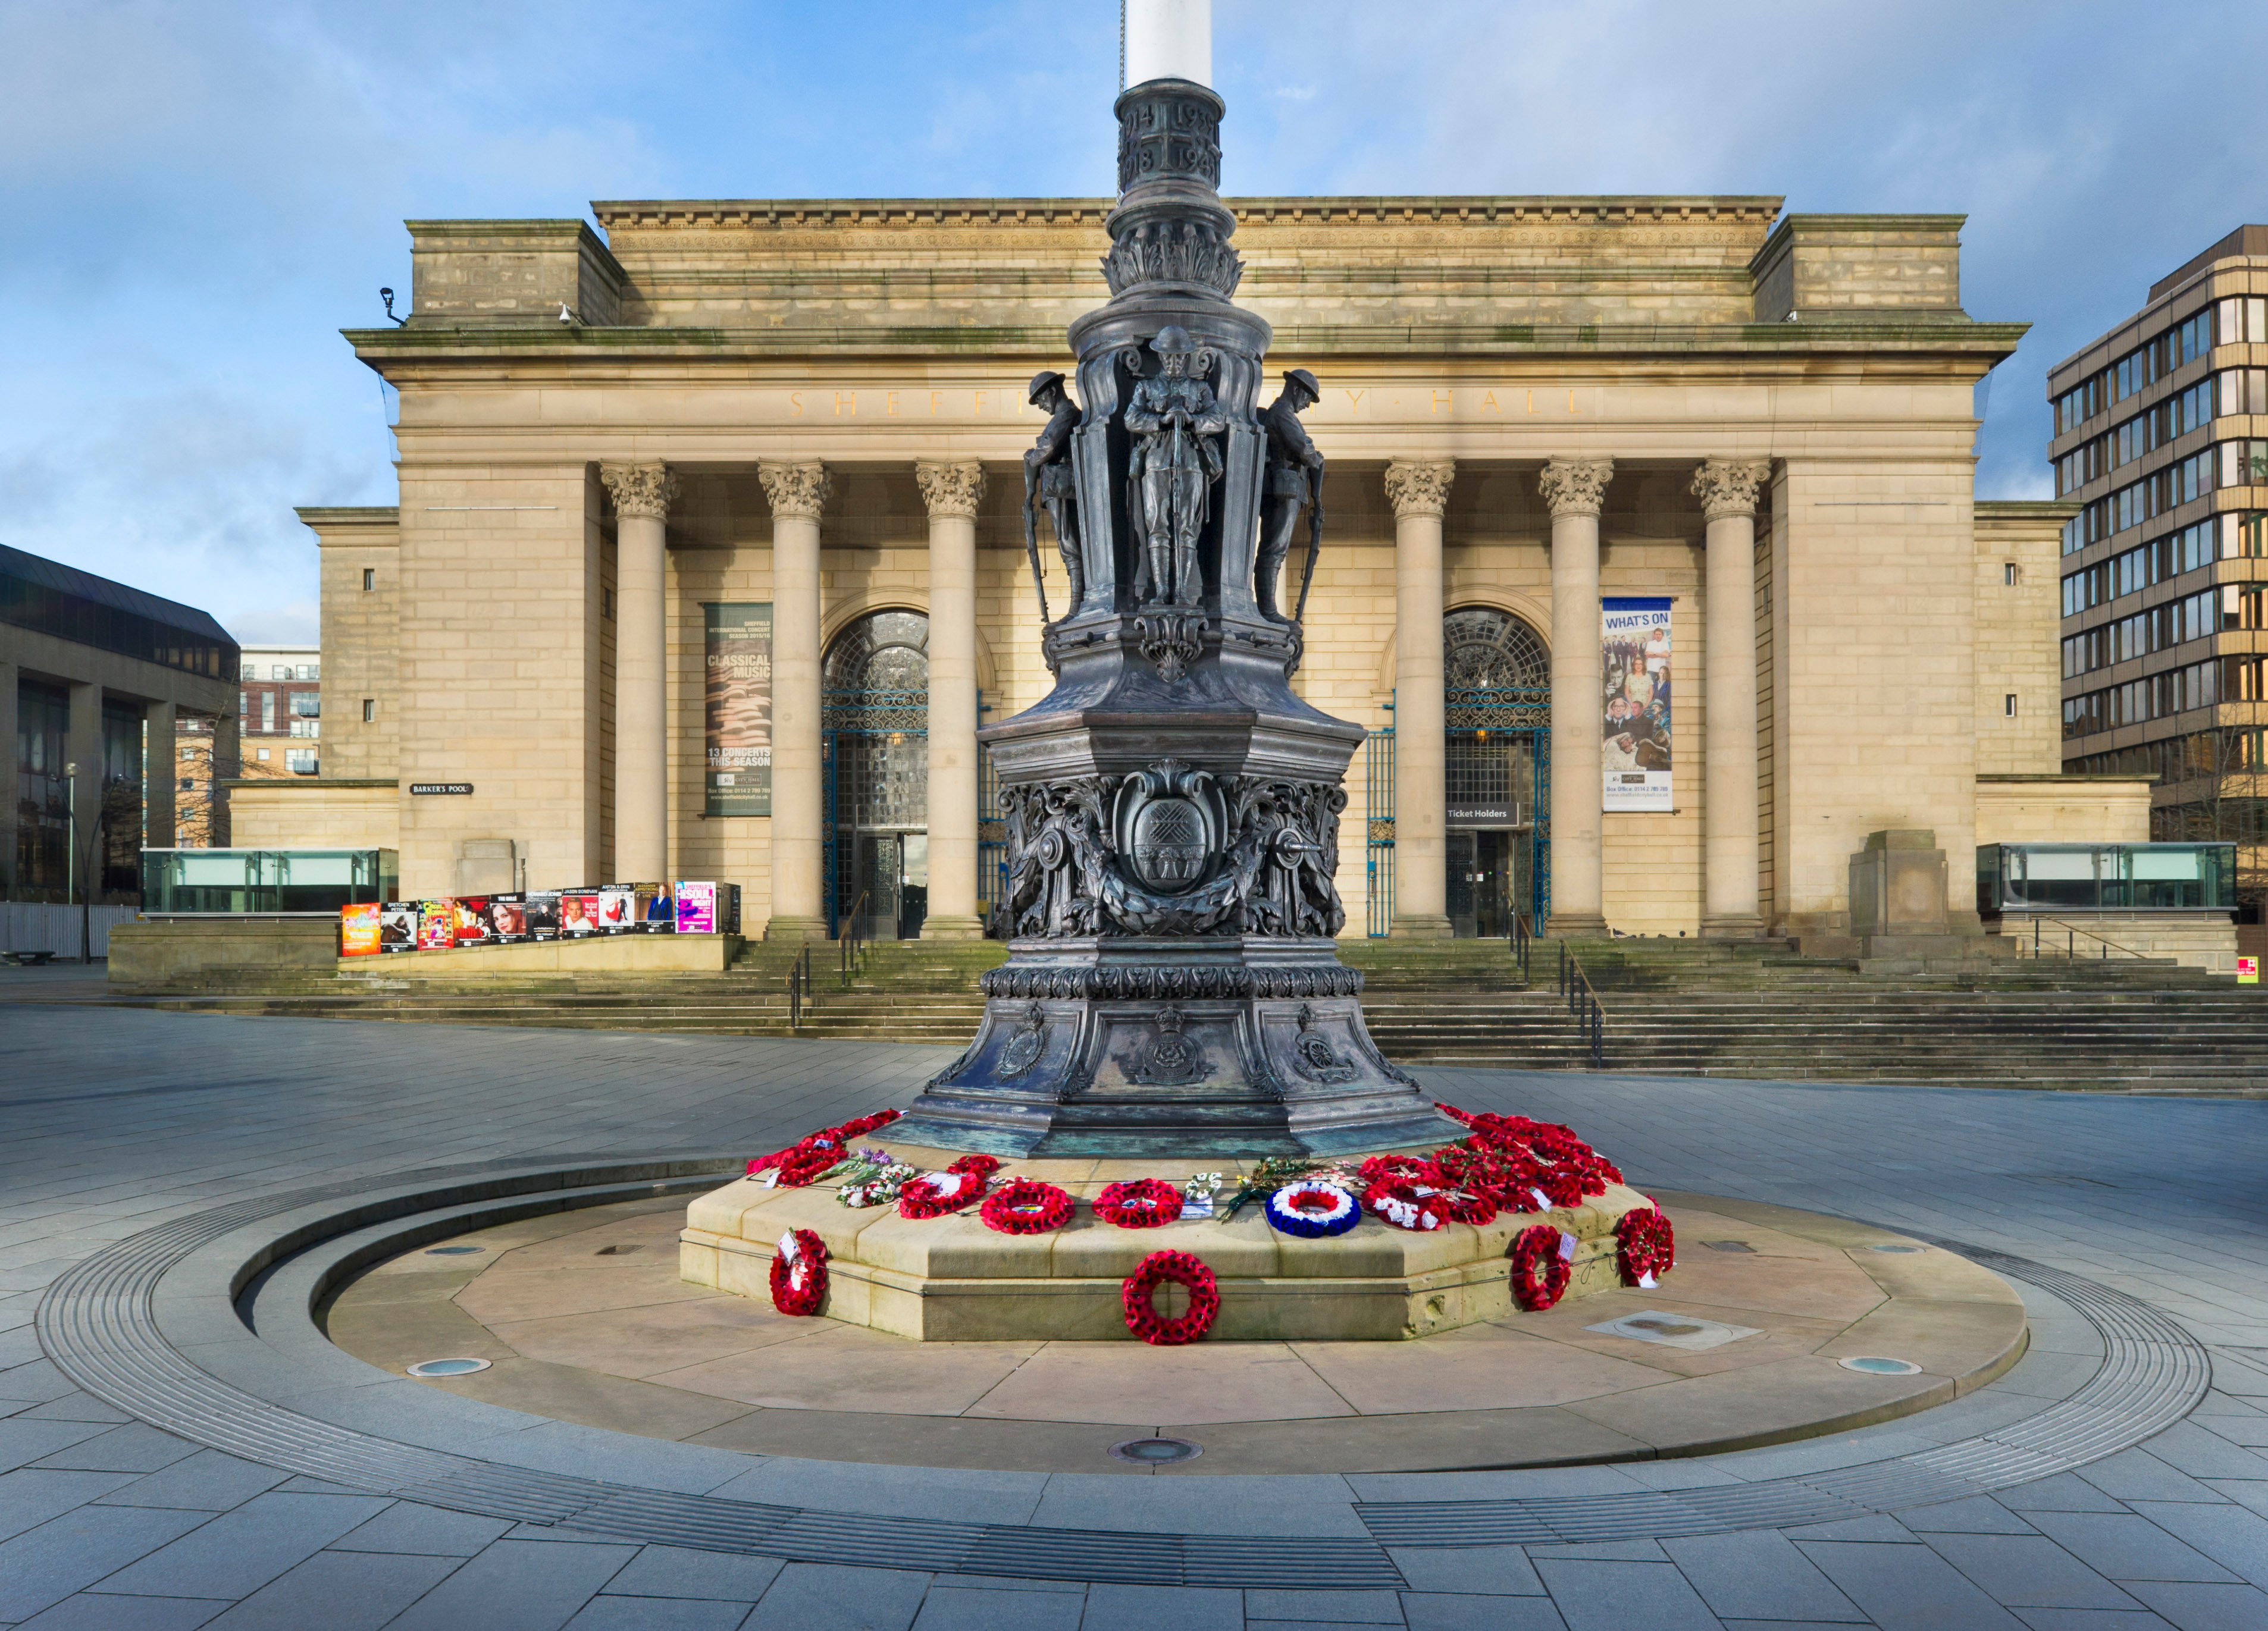 Image of Sheffield War Memorial, Barker’s Pool, Sheffield, South Yorkshire, newly upgraded to II*. This unusual but striking flagpole decorated with bronze sculptures at its base commemorates the men of Sheffield who died during the World Wars. Remembered among them are the Sheffield Pals, of whom over 500 were killed or injured on the first day of the Somme.